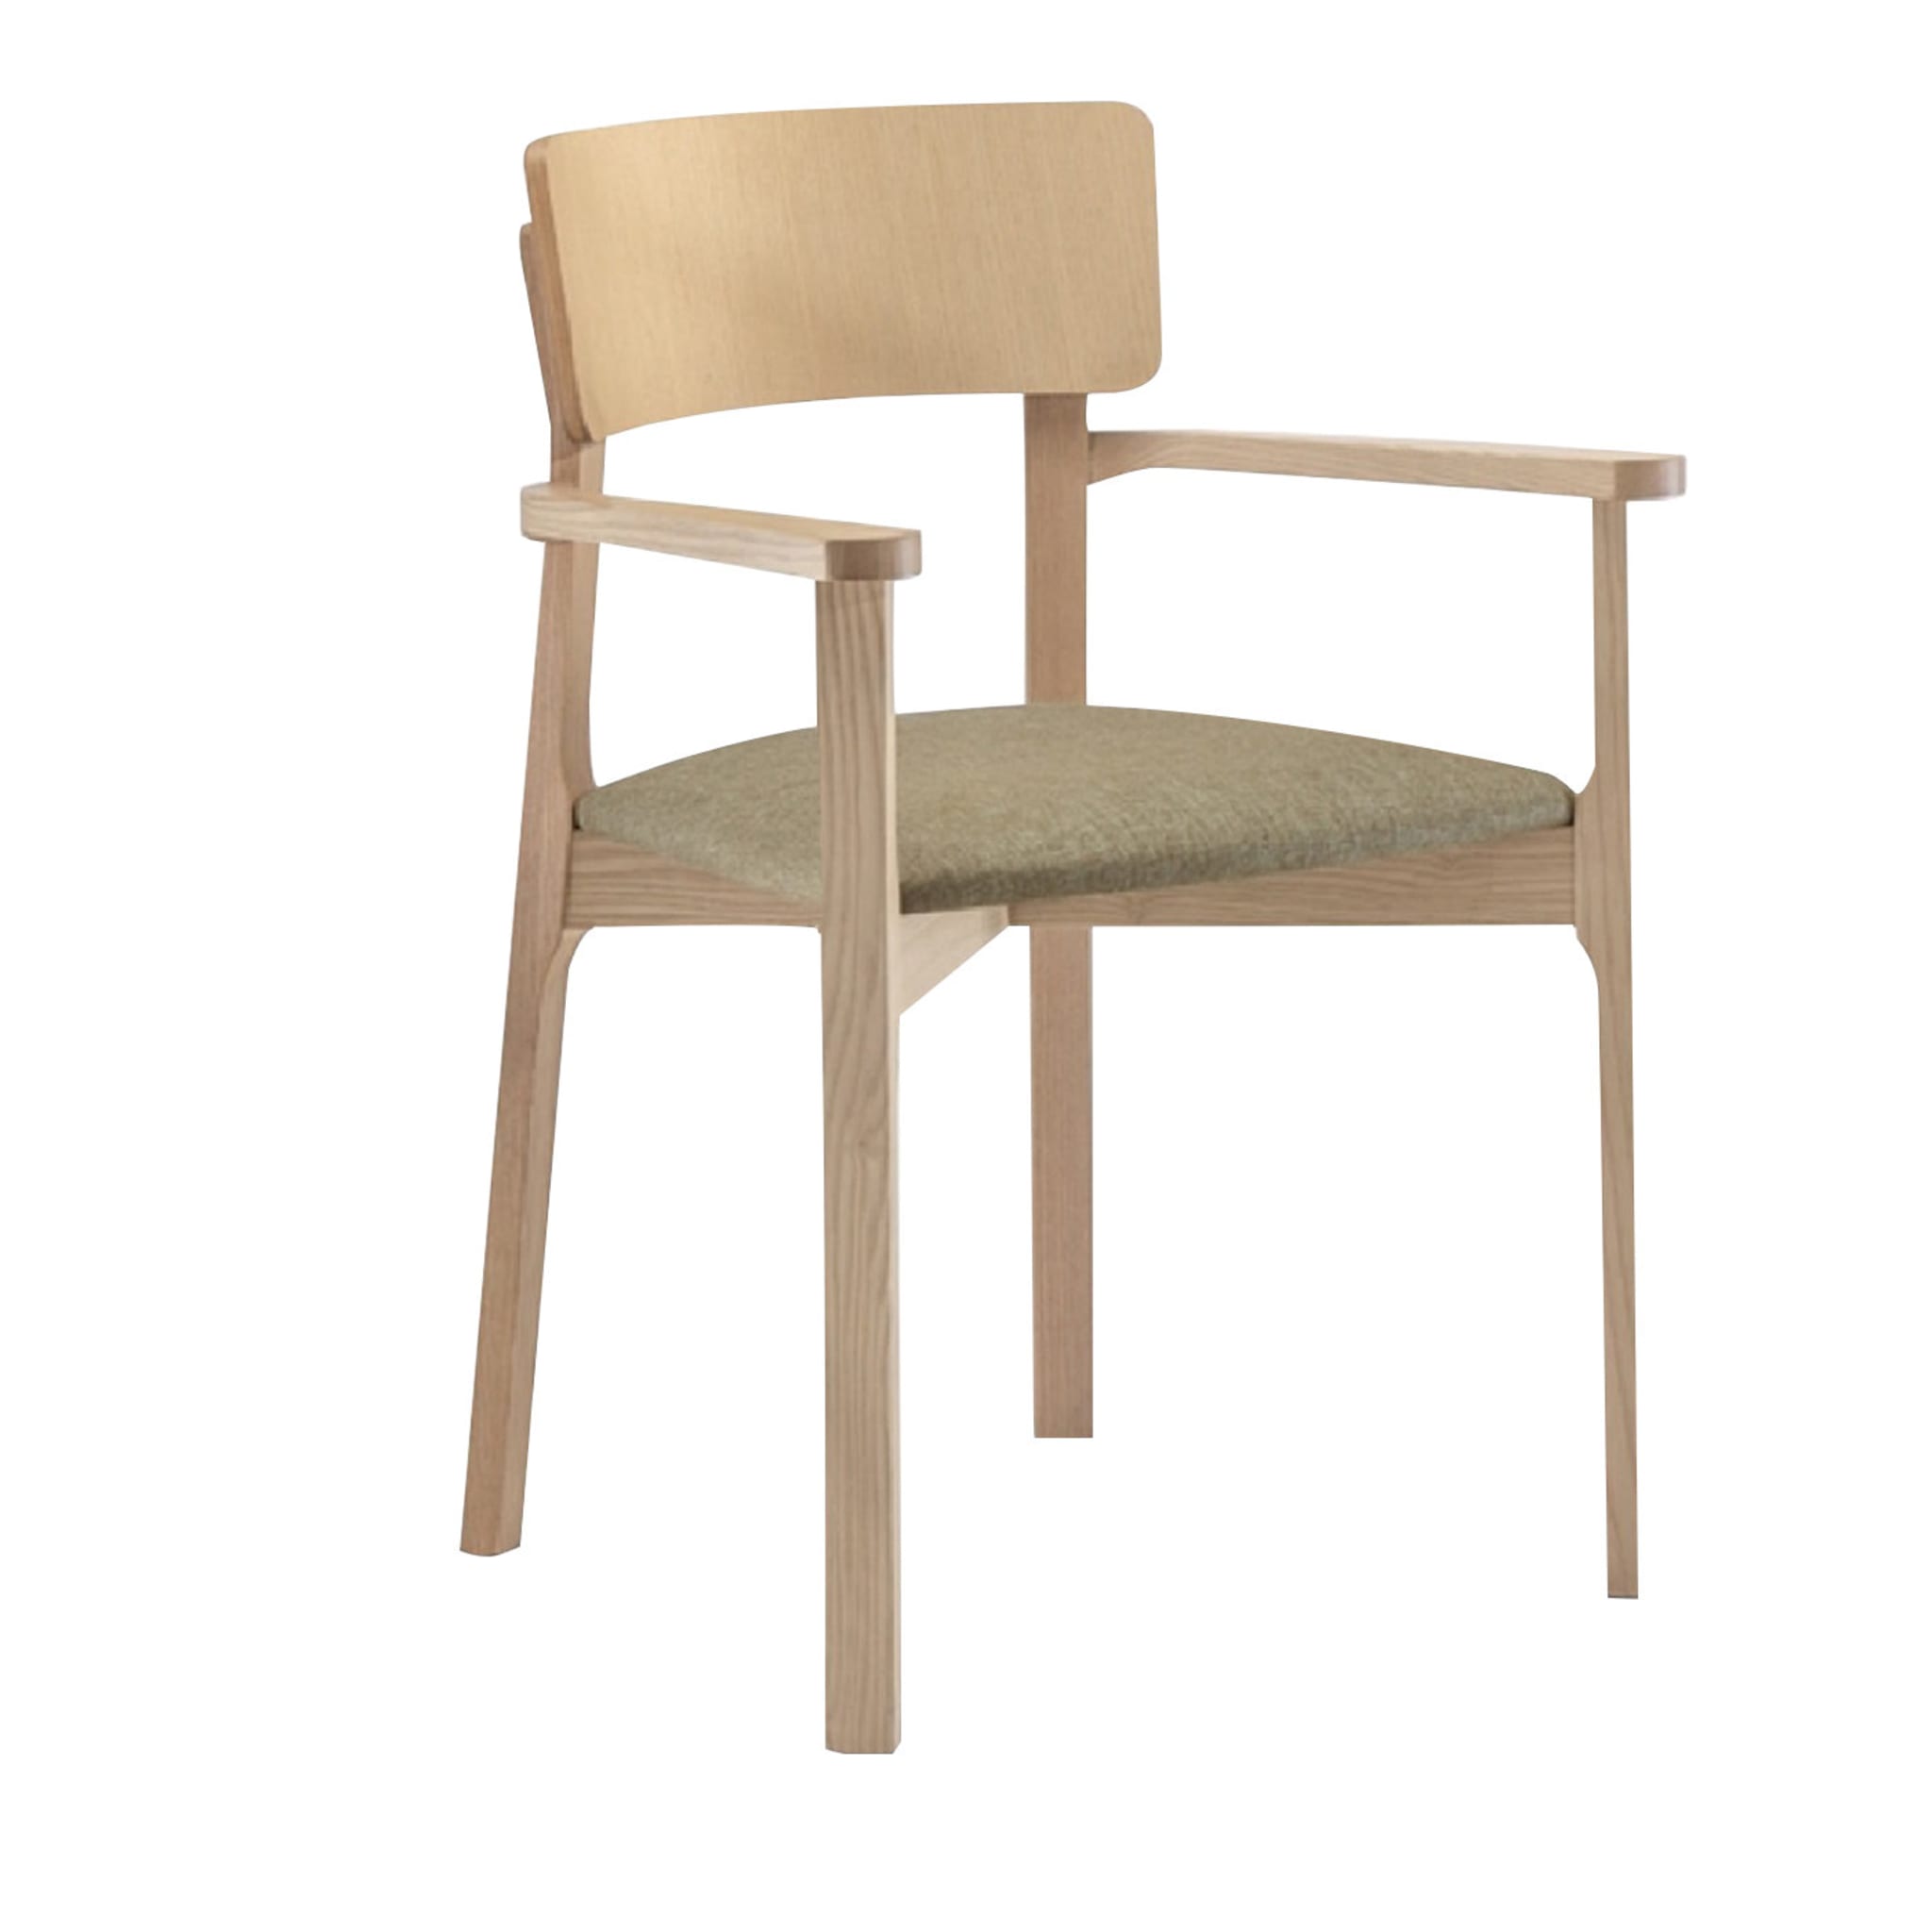 Set of 2 Andy Beige Chairs - Main view